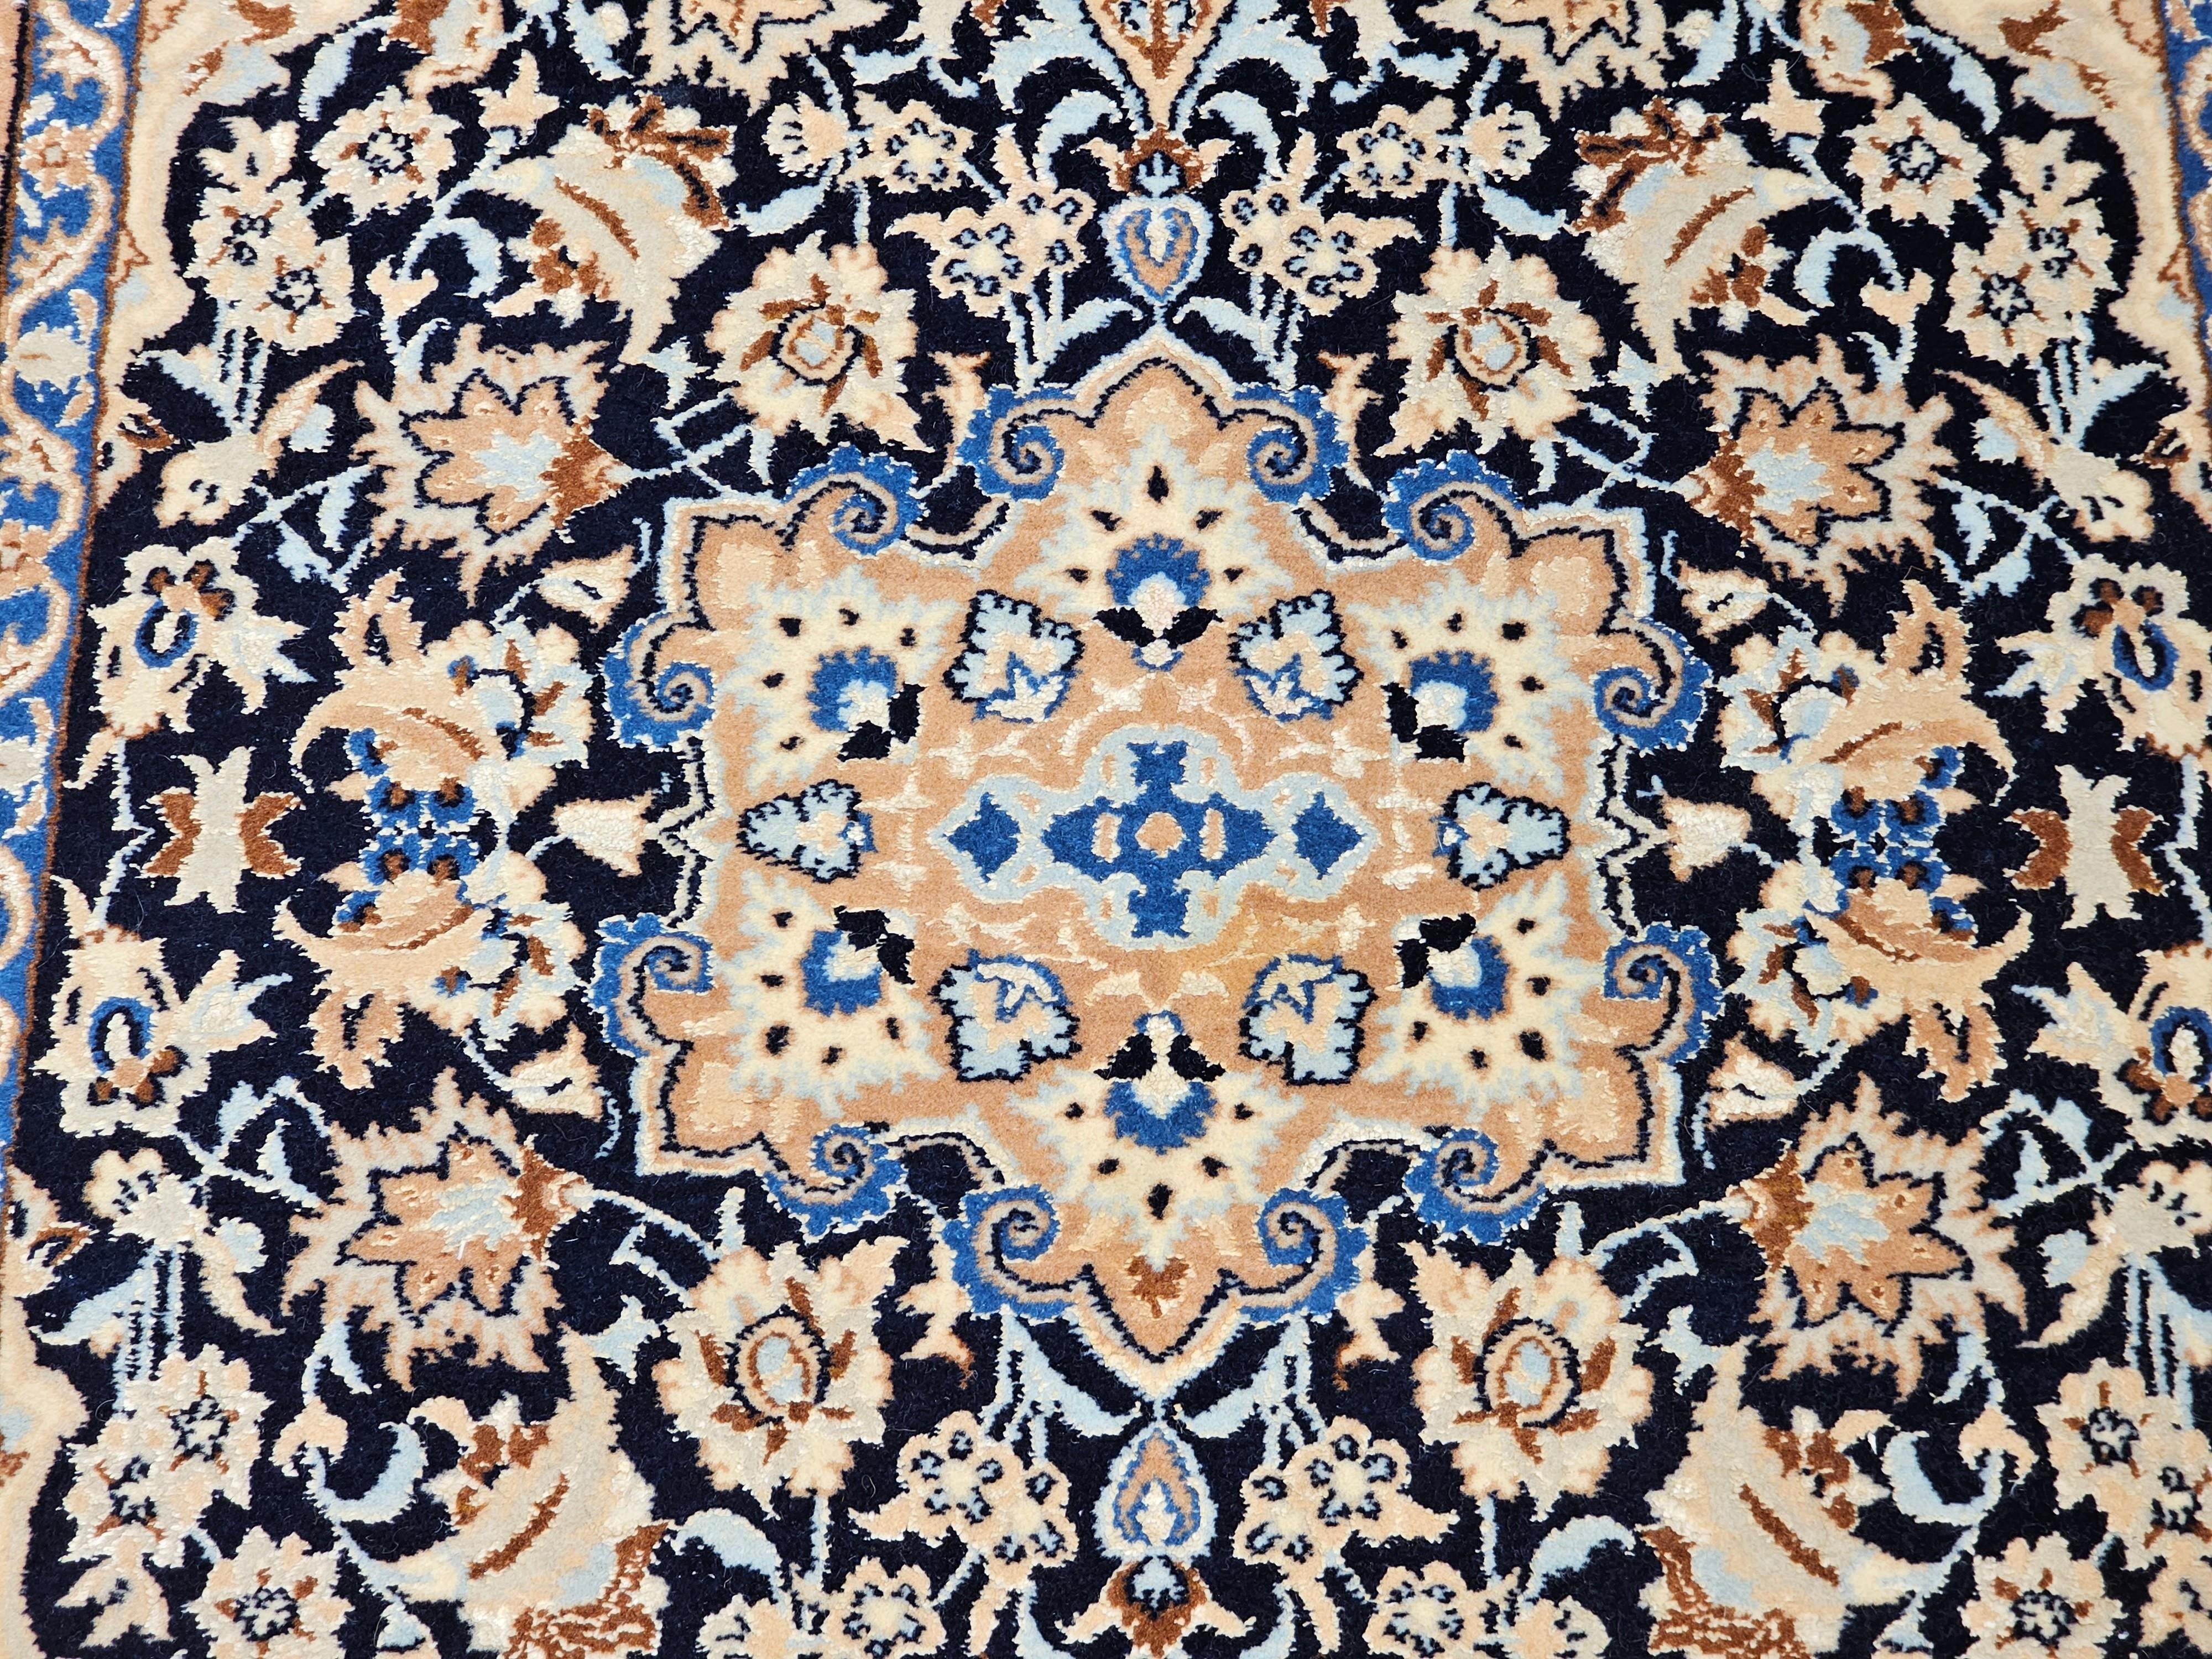 Vintage Persian Nain Area Rug in Tiffany Blue, French Blue, Navy Blue, Caramel In Good Condition For Sale In Barrington, IL